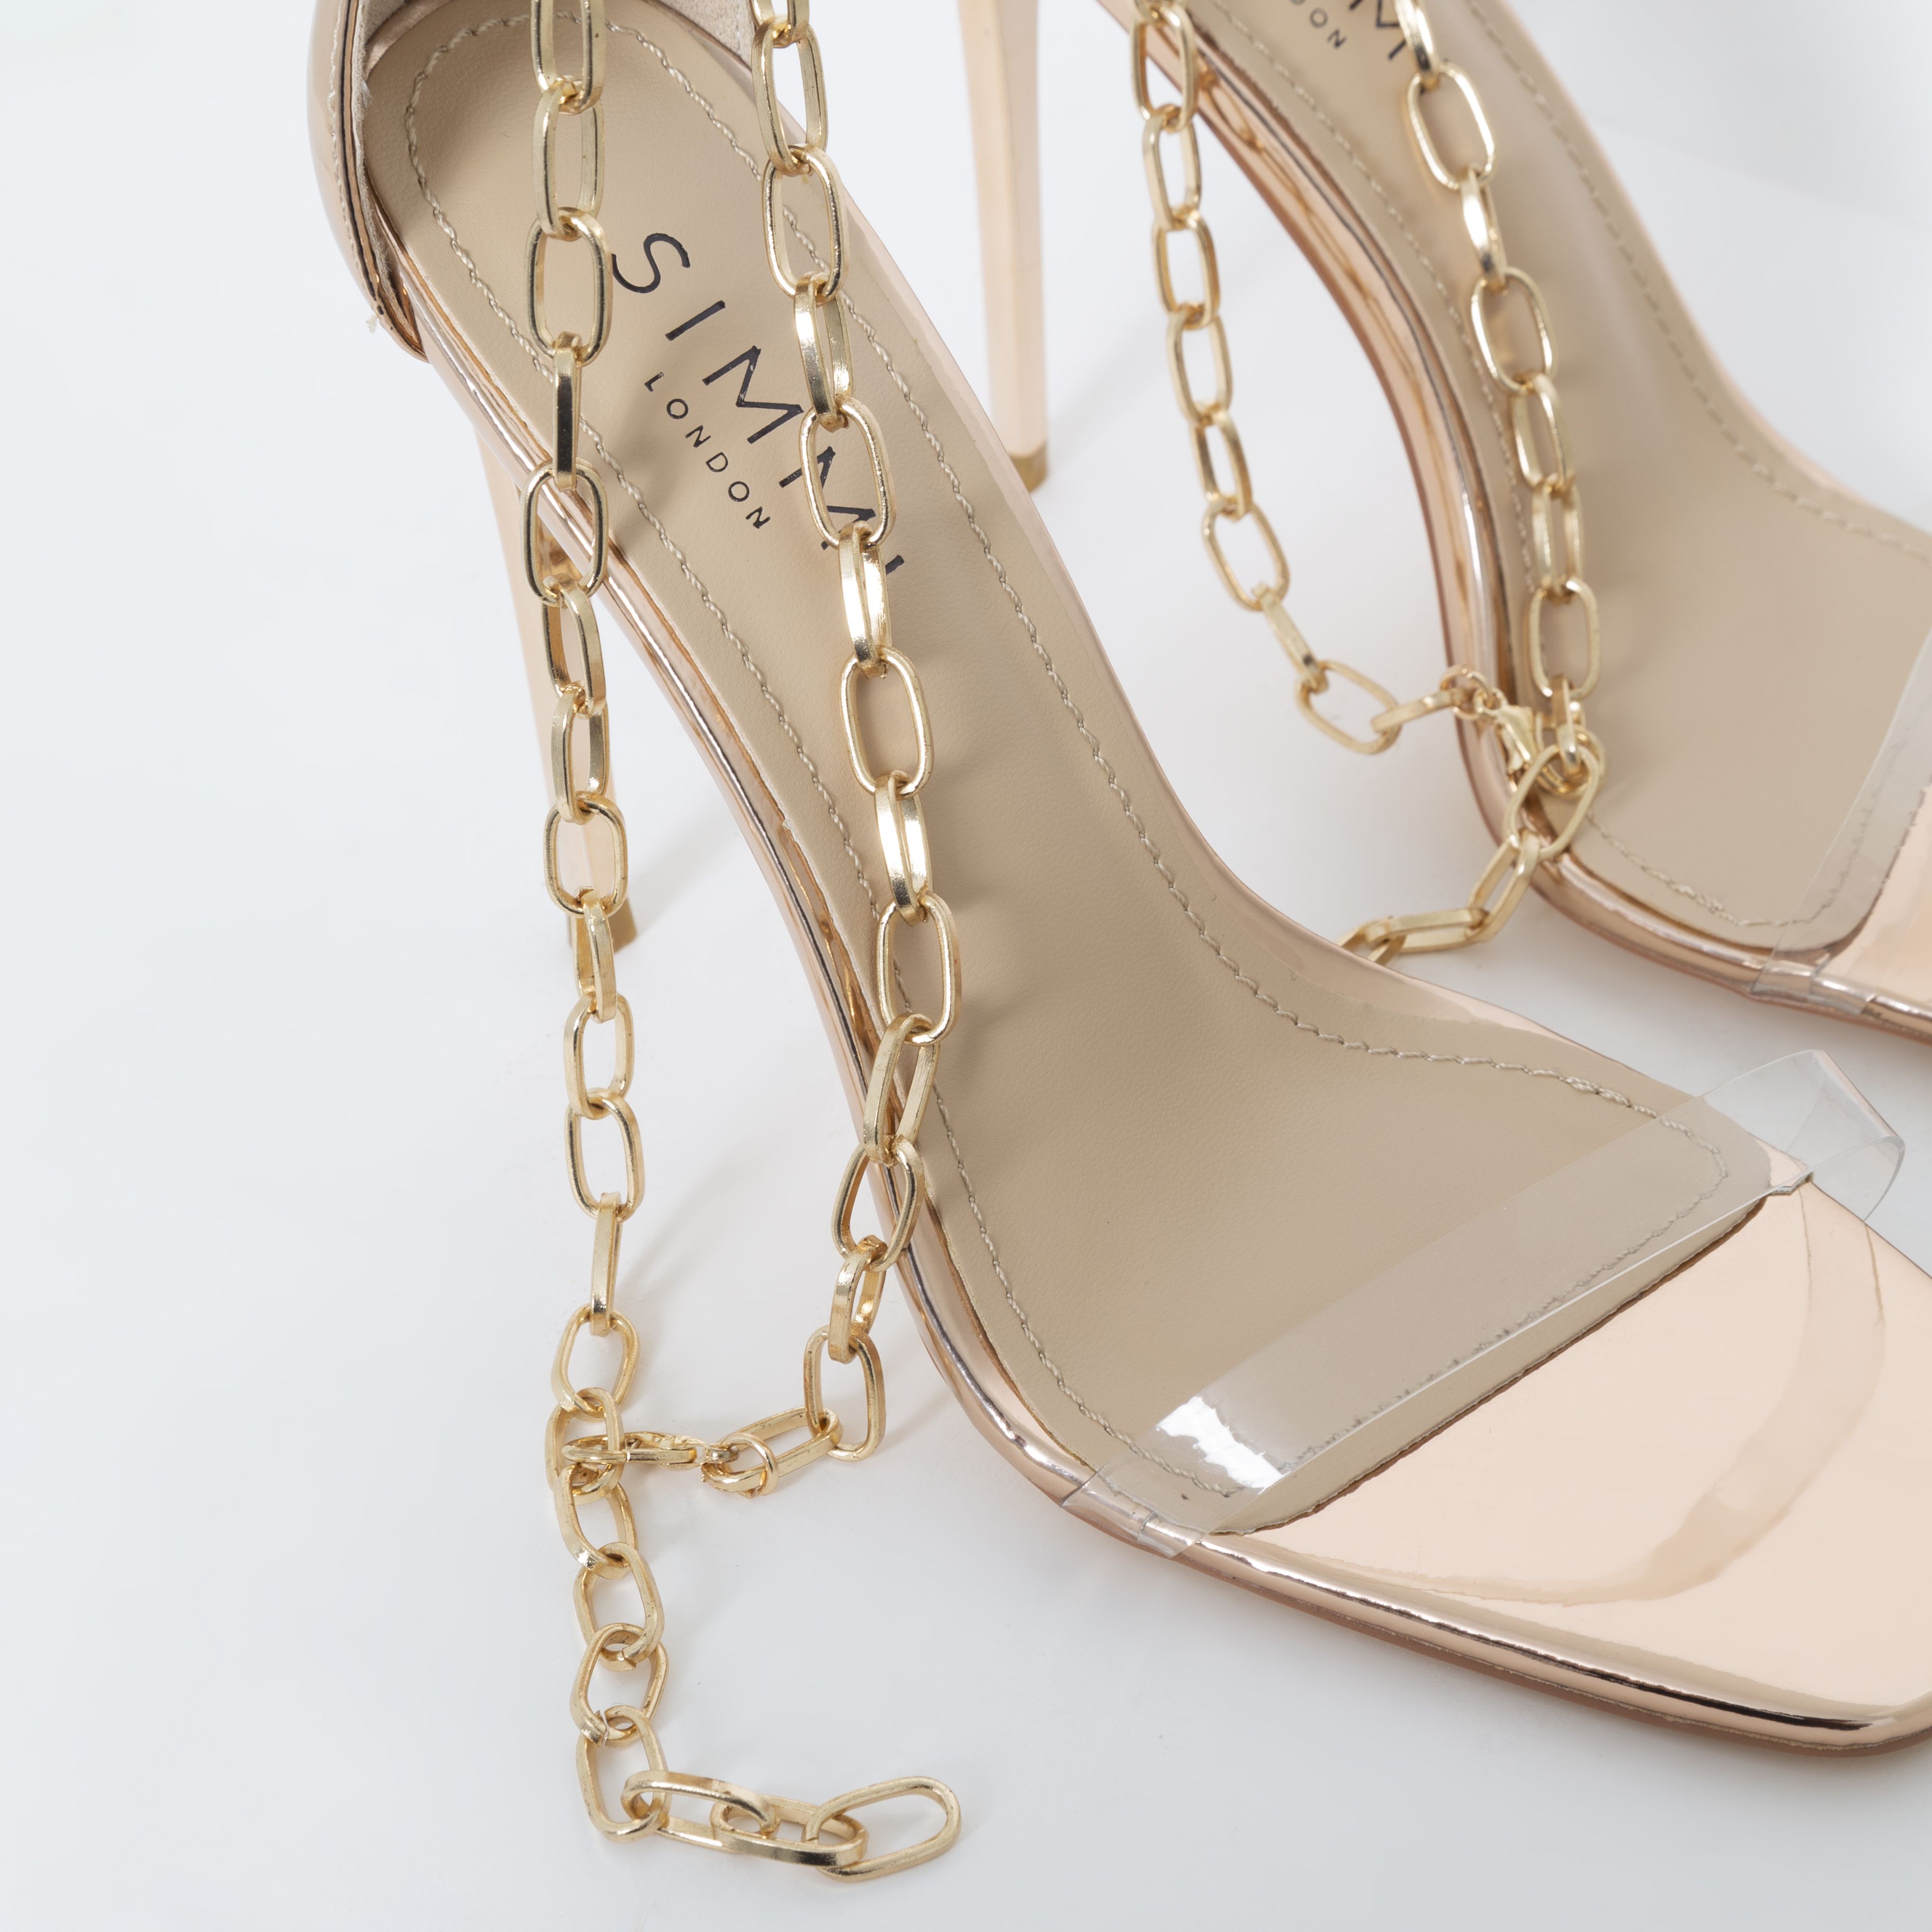 Ruiz Rose Gold Clear Ankle Chain Stiletto Heels